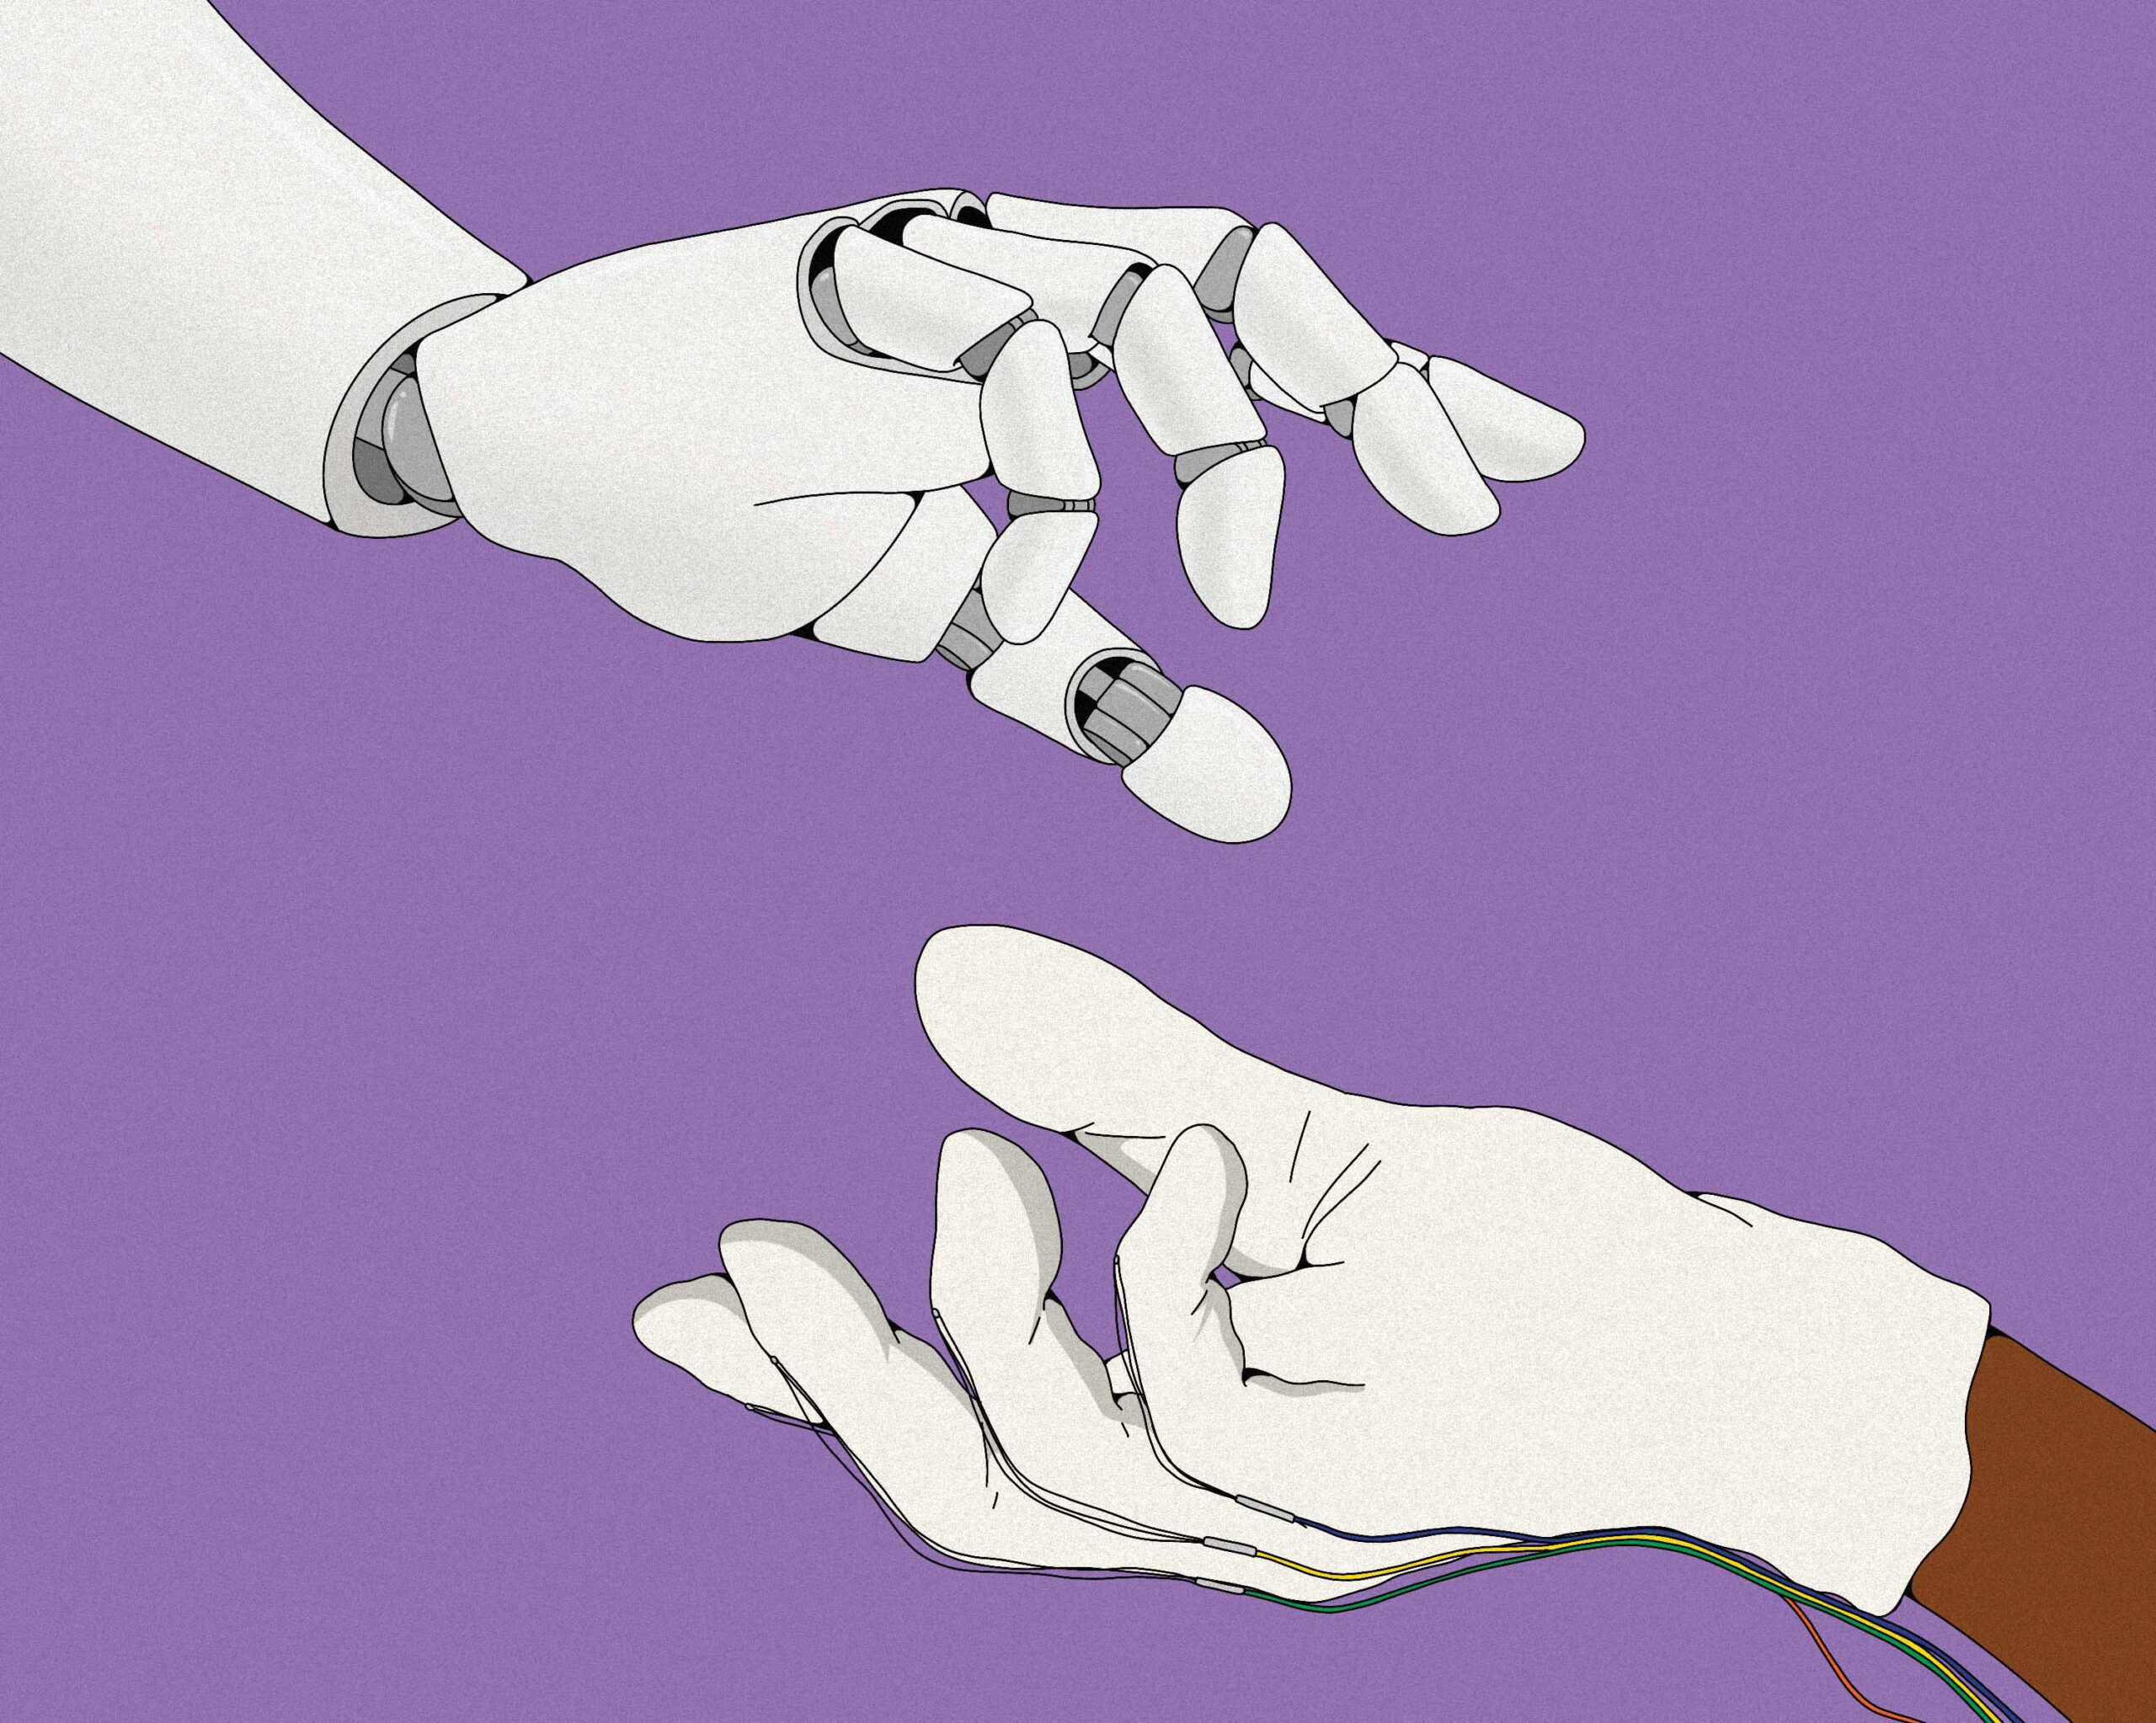 A white robot hand reaching from the top left toward a white-gloved human hand held palm-up on the bottom right